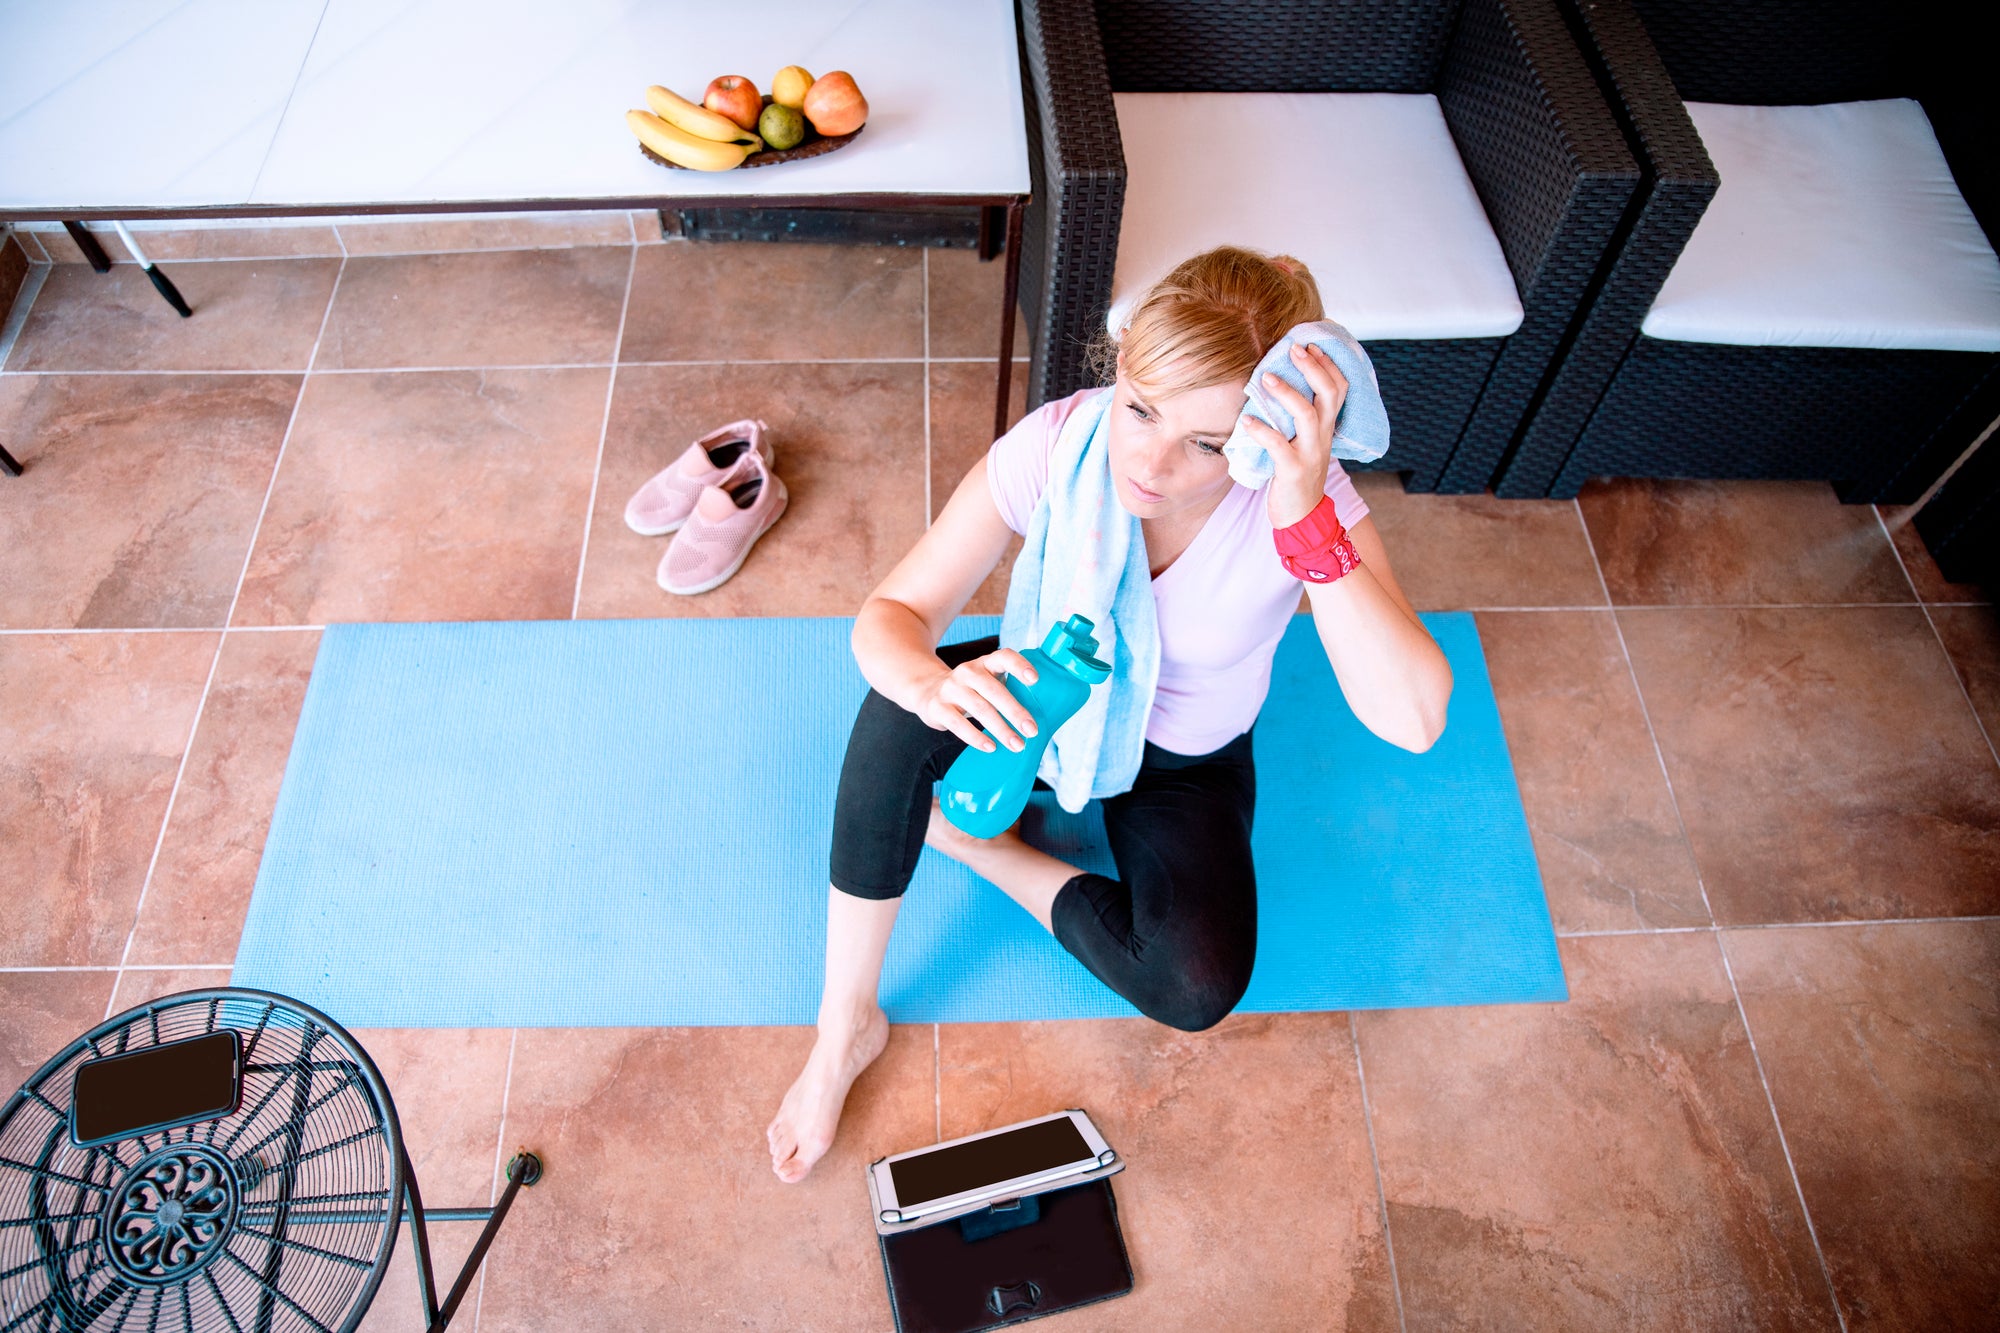 Person with red ponytail in pink shirt and black workout leggings on a blue yoga mat drinking water and wiping sweat off